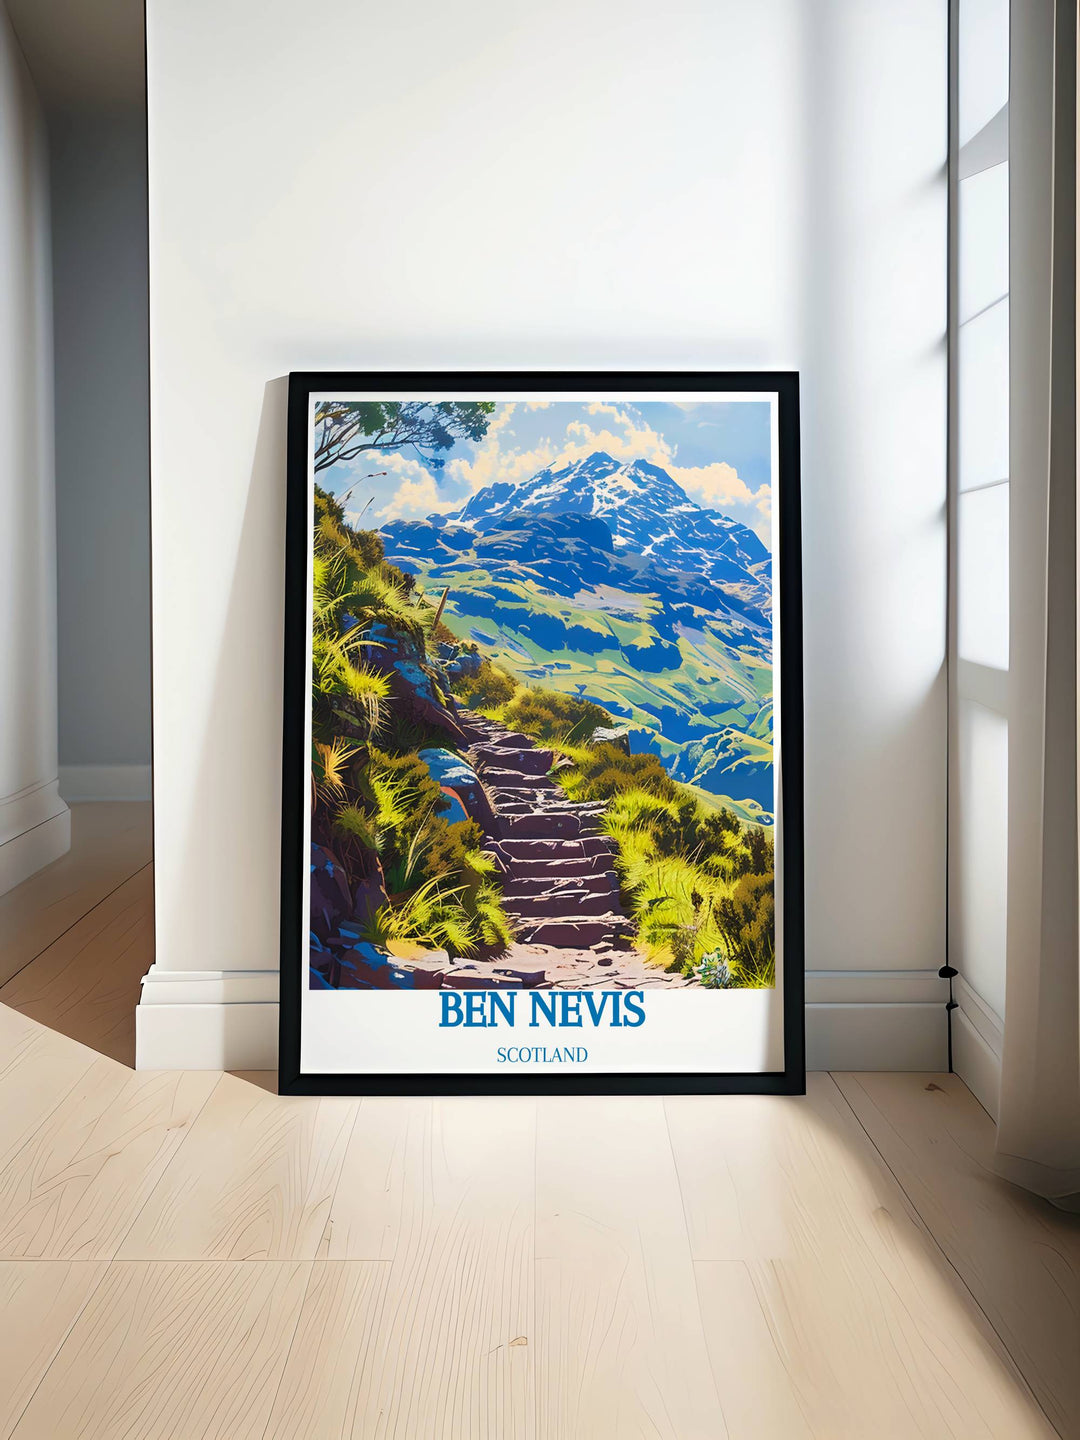 Full artwork scene of Ben Nevis Steps with a comprehensive view of the ascent and the expansive Highland scenery